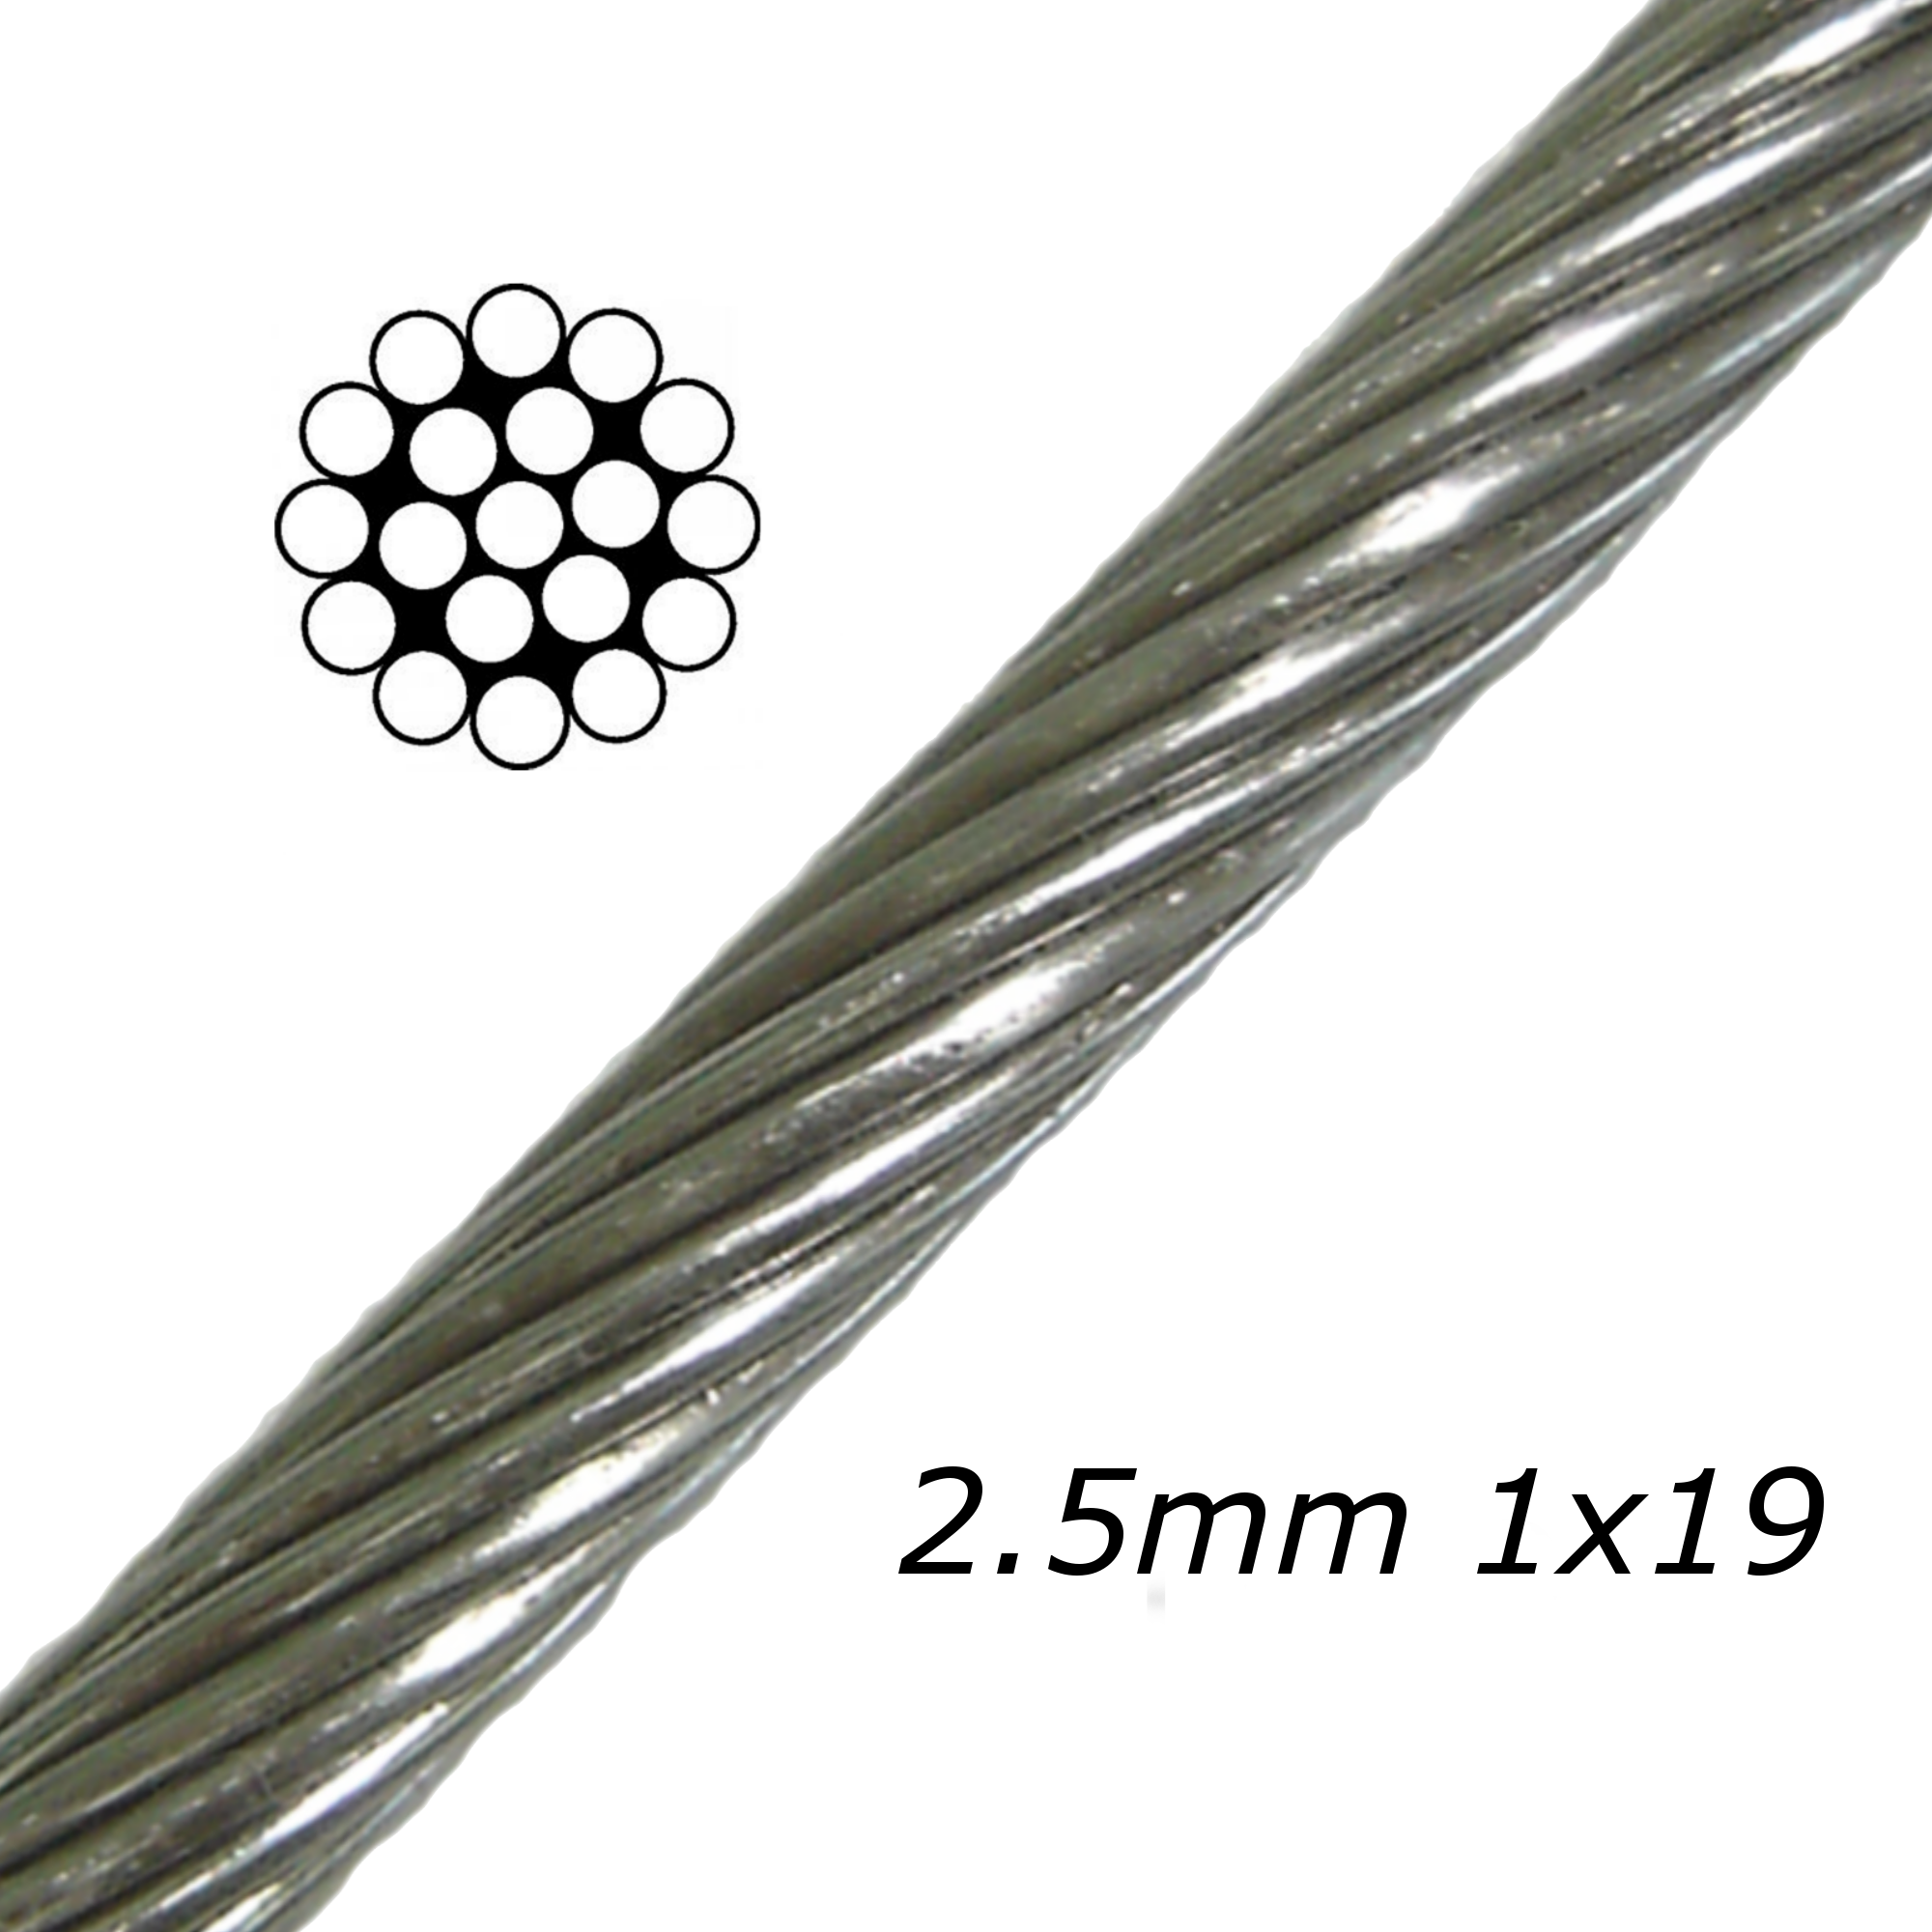 100 MTRS X 2.5MM 1/19  STAINLESS STEEL 316  WIRE ROPE 